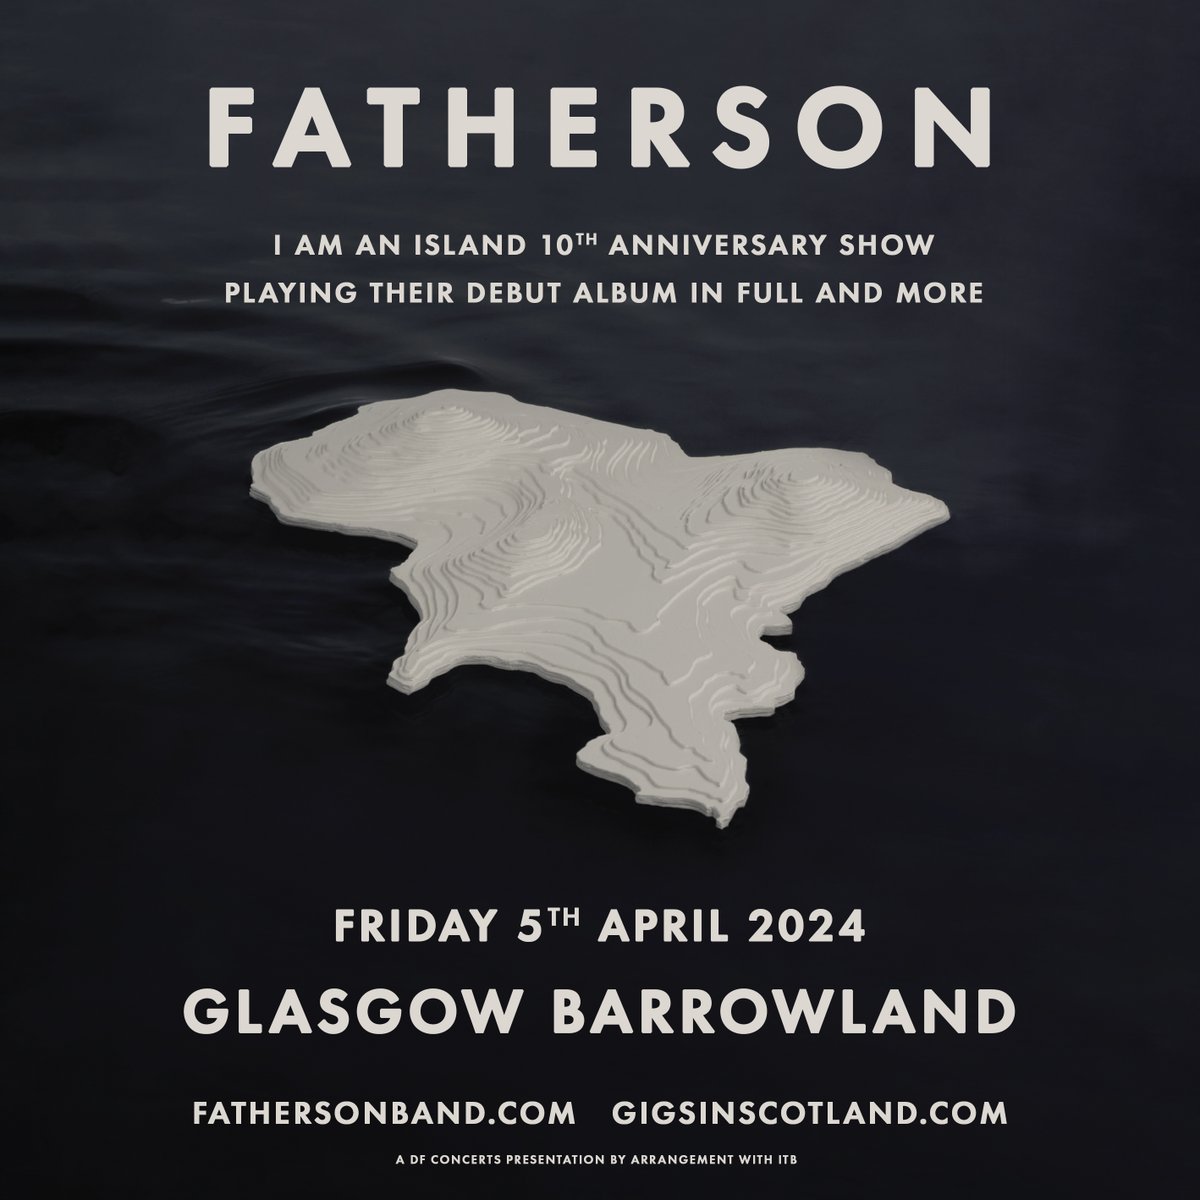 ON SALE NOW 🎟️» @fathersonband I Am An Island 10th Anniversary Show @TheBarrowlands | 5th April 2024 TICKETS ⇾ gigss.co/fatherson